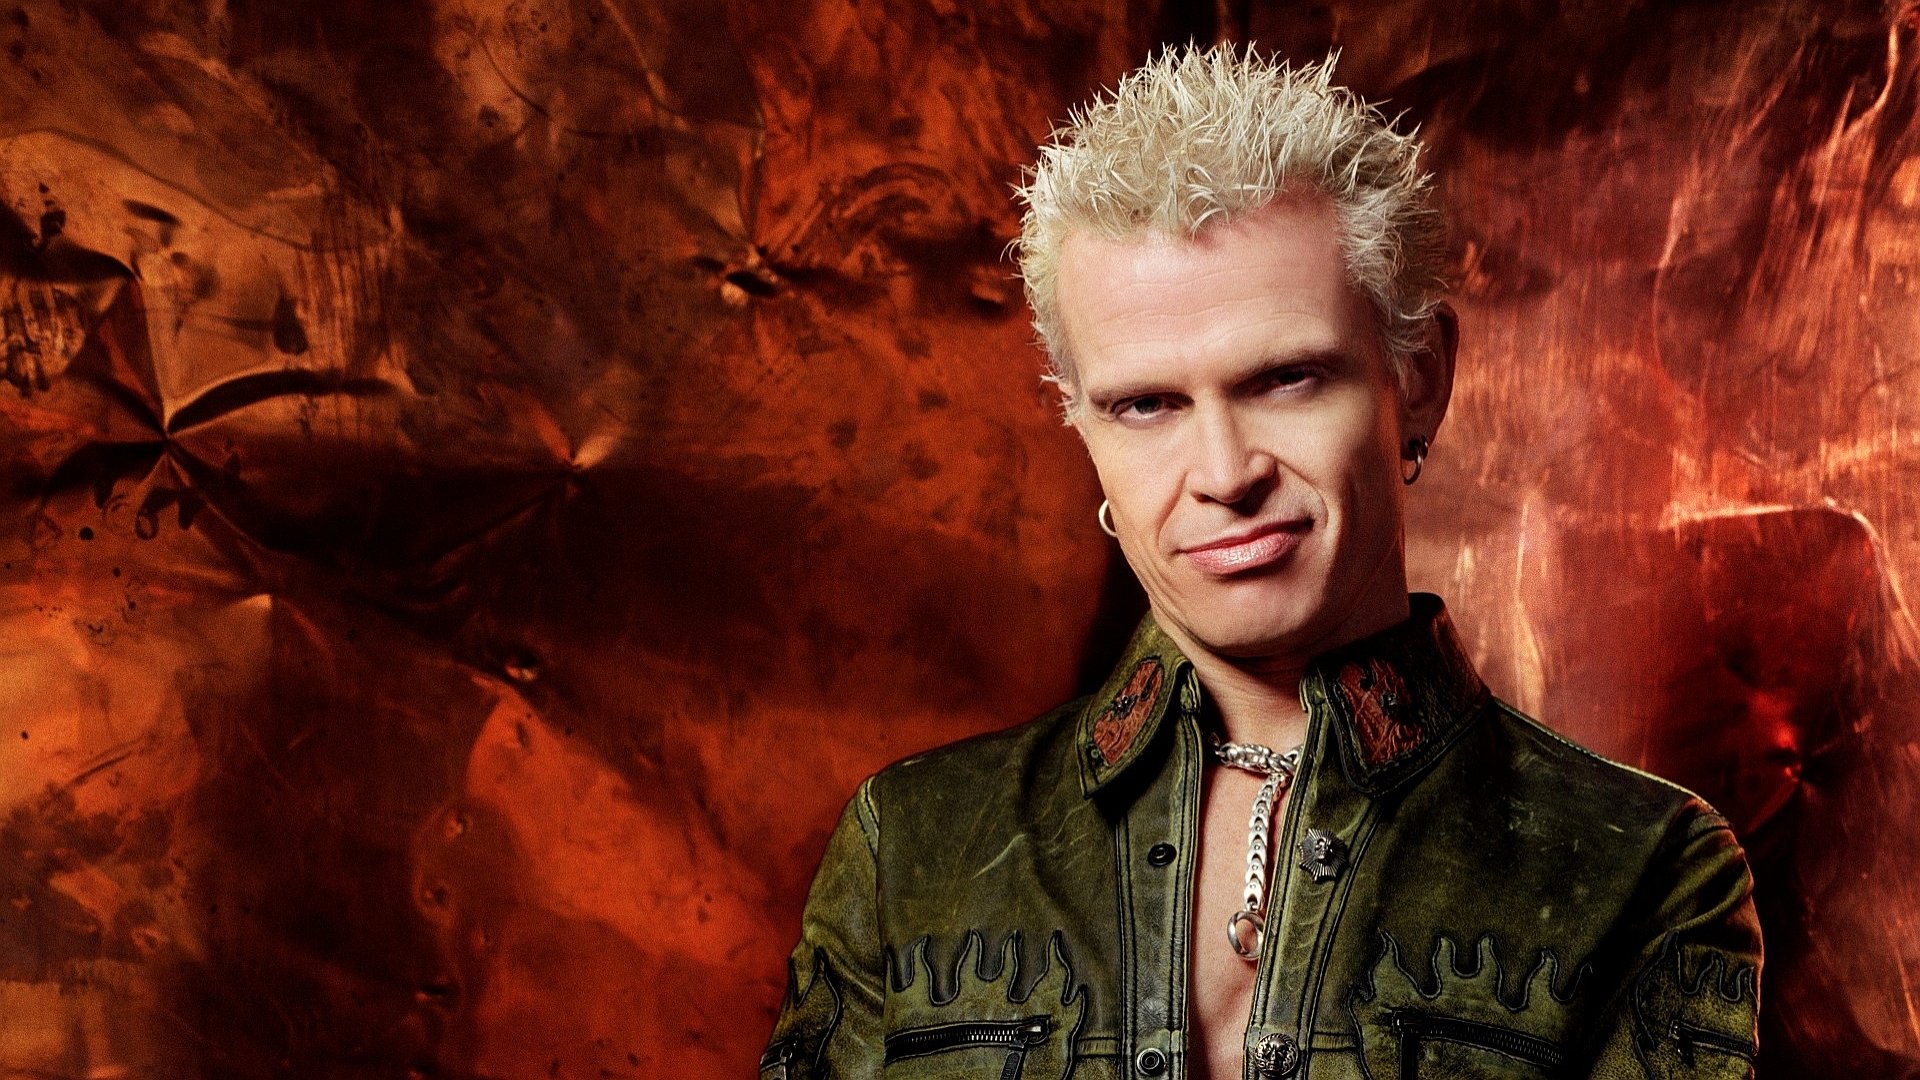 Billy Idol Full HD Wallpaper and Background Image | 1920x1080 | ID:1958781920 x 1080